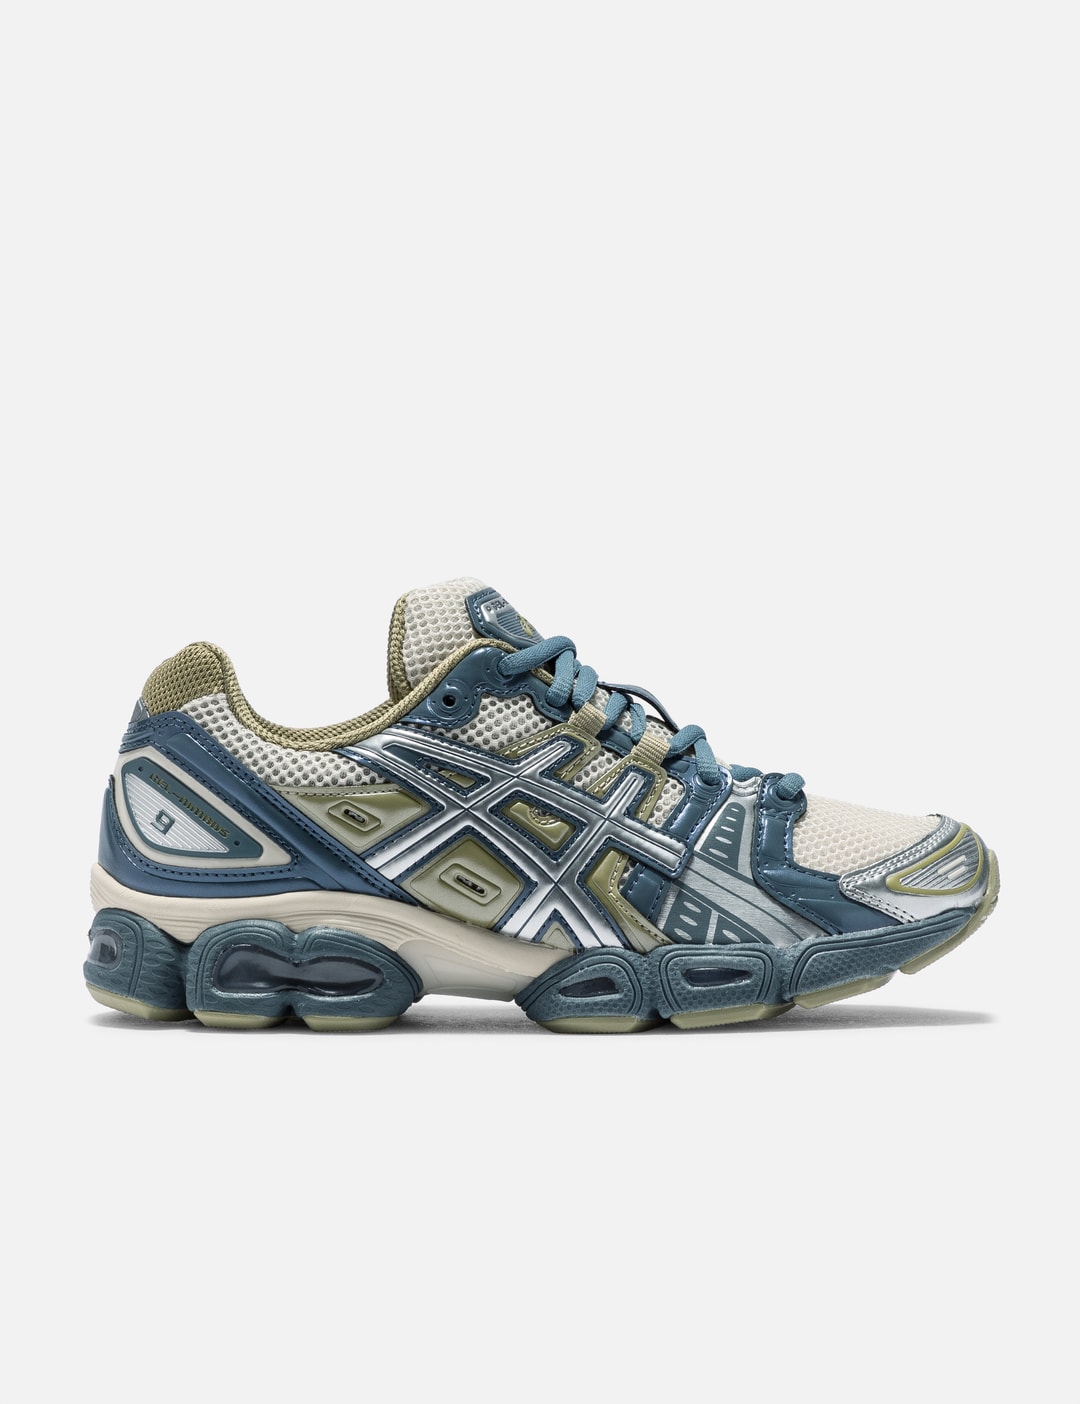 Asics - GEL-NIMBUS 9 | HBX - Globally Curated Fashion and Lifestyle by ...